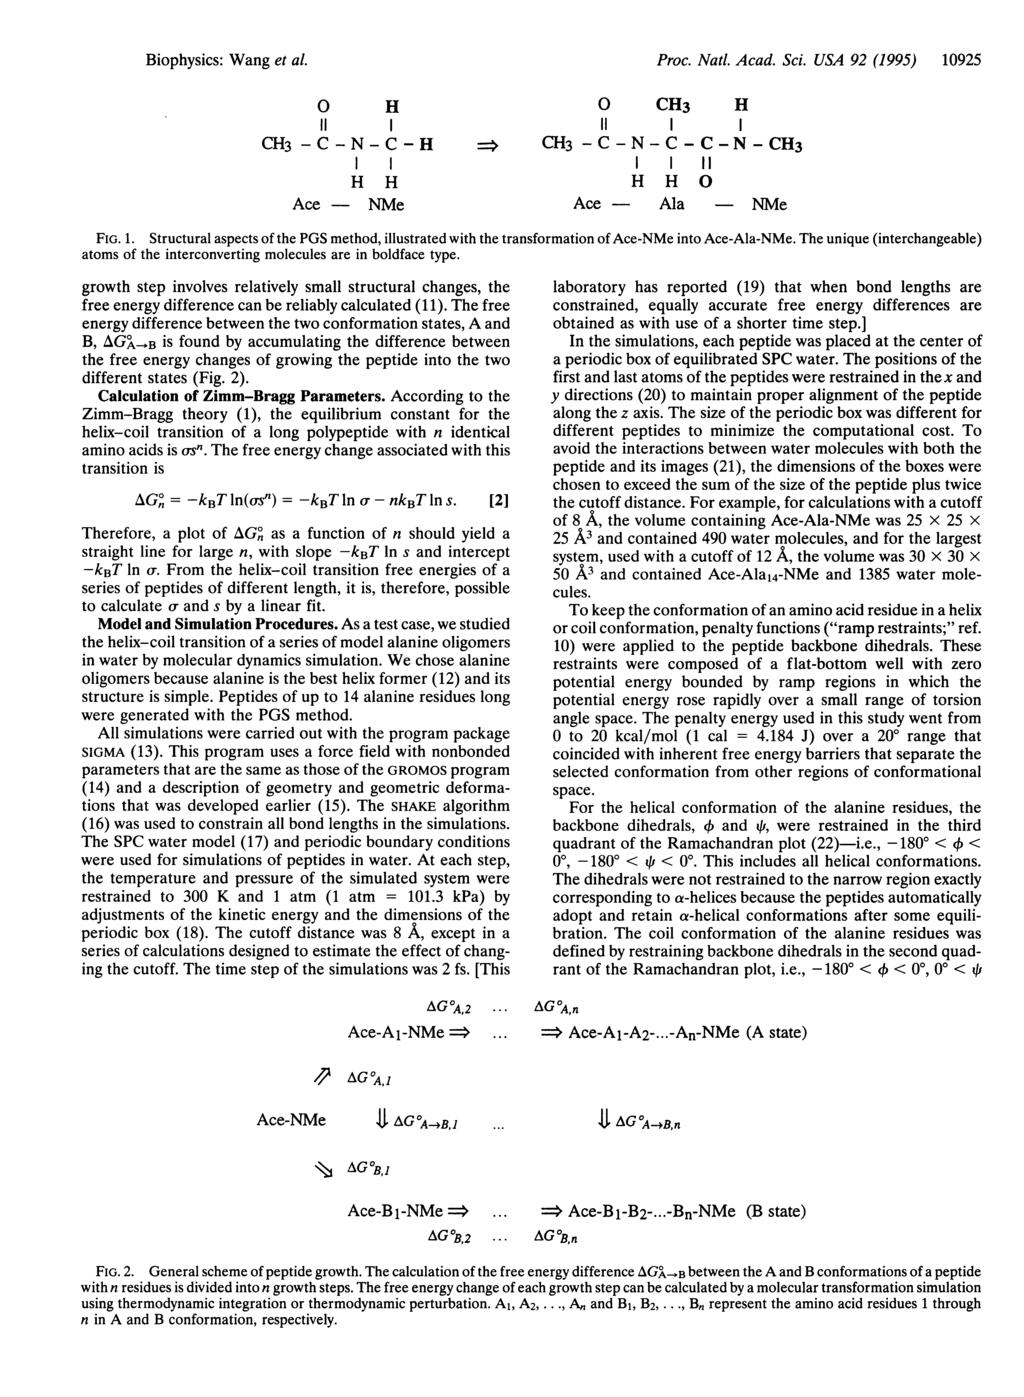 Biophysics: Wang et al. Proc. Natl. Acad. Sci. USA 92 (1995) 10925 0 H 11 CH3 -C-N-C-H H H Ace - NMe 0 CH3 H 11 I > CH3 -C-N-C-C-N-CH3 I 11 H H O Ace - Ala - NMe FIG. 1. Structural aspects of the PGS method, illustrated with the transformation of Ace-NMe into Ace-Ala-NMe.